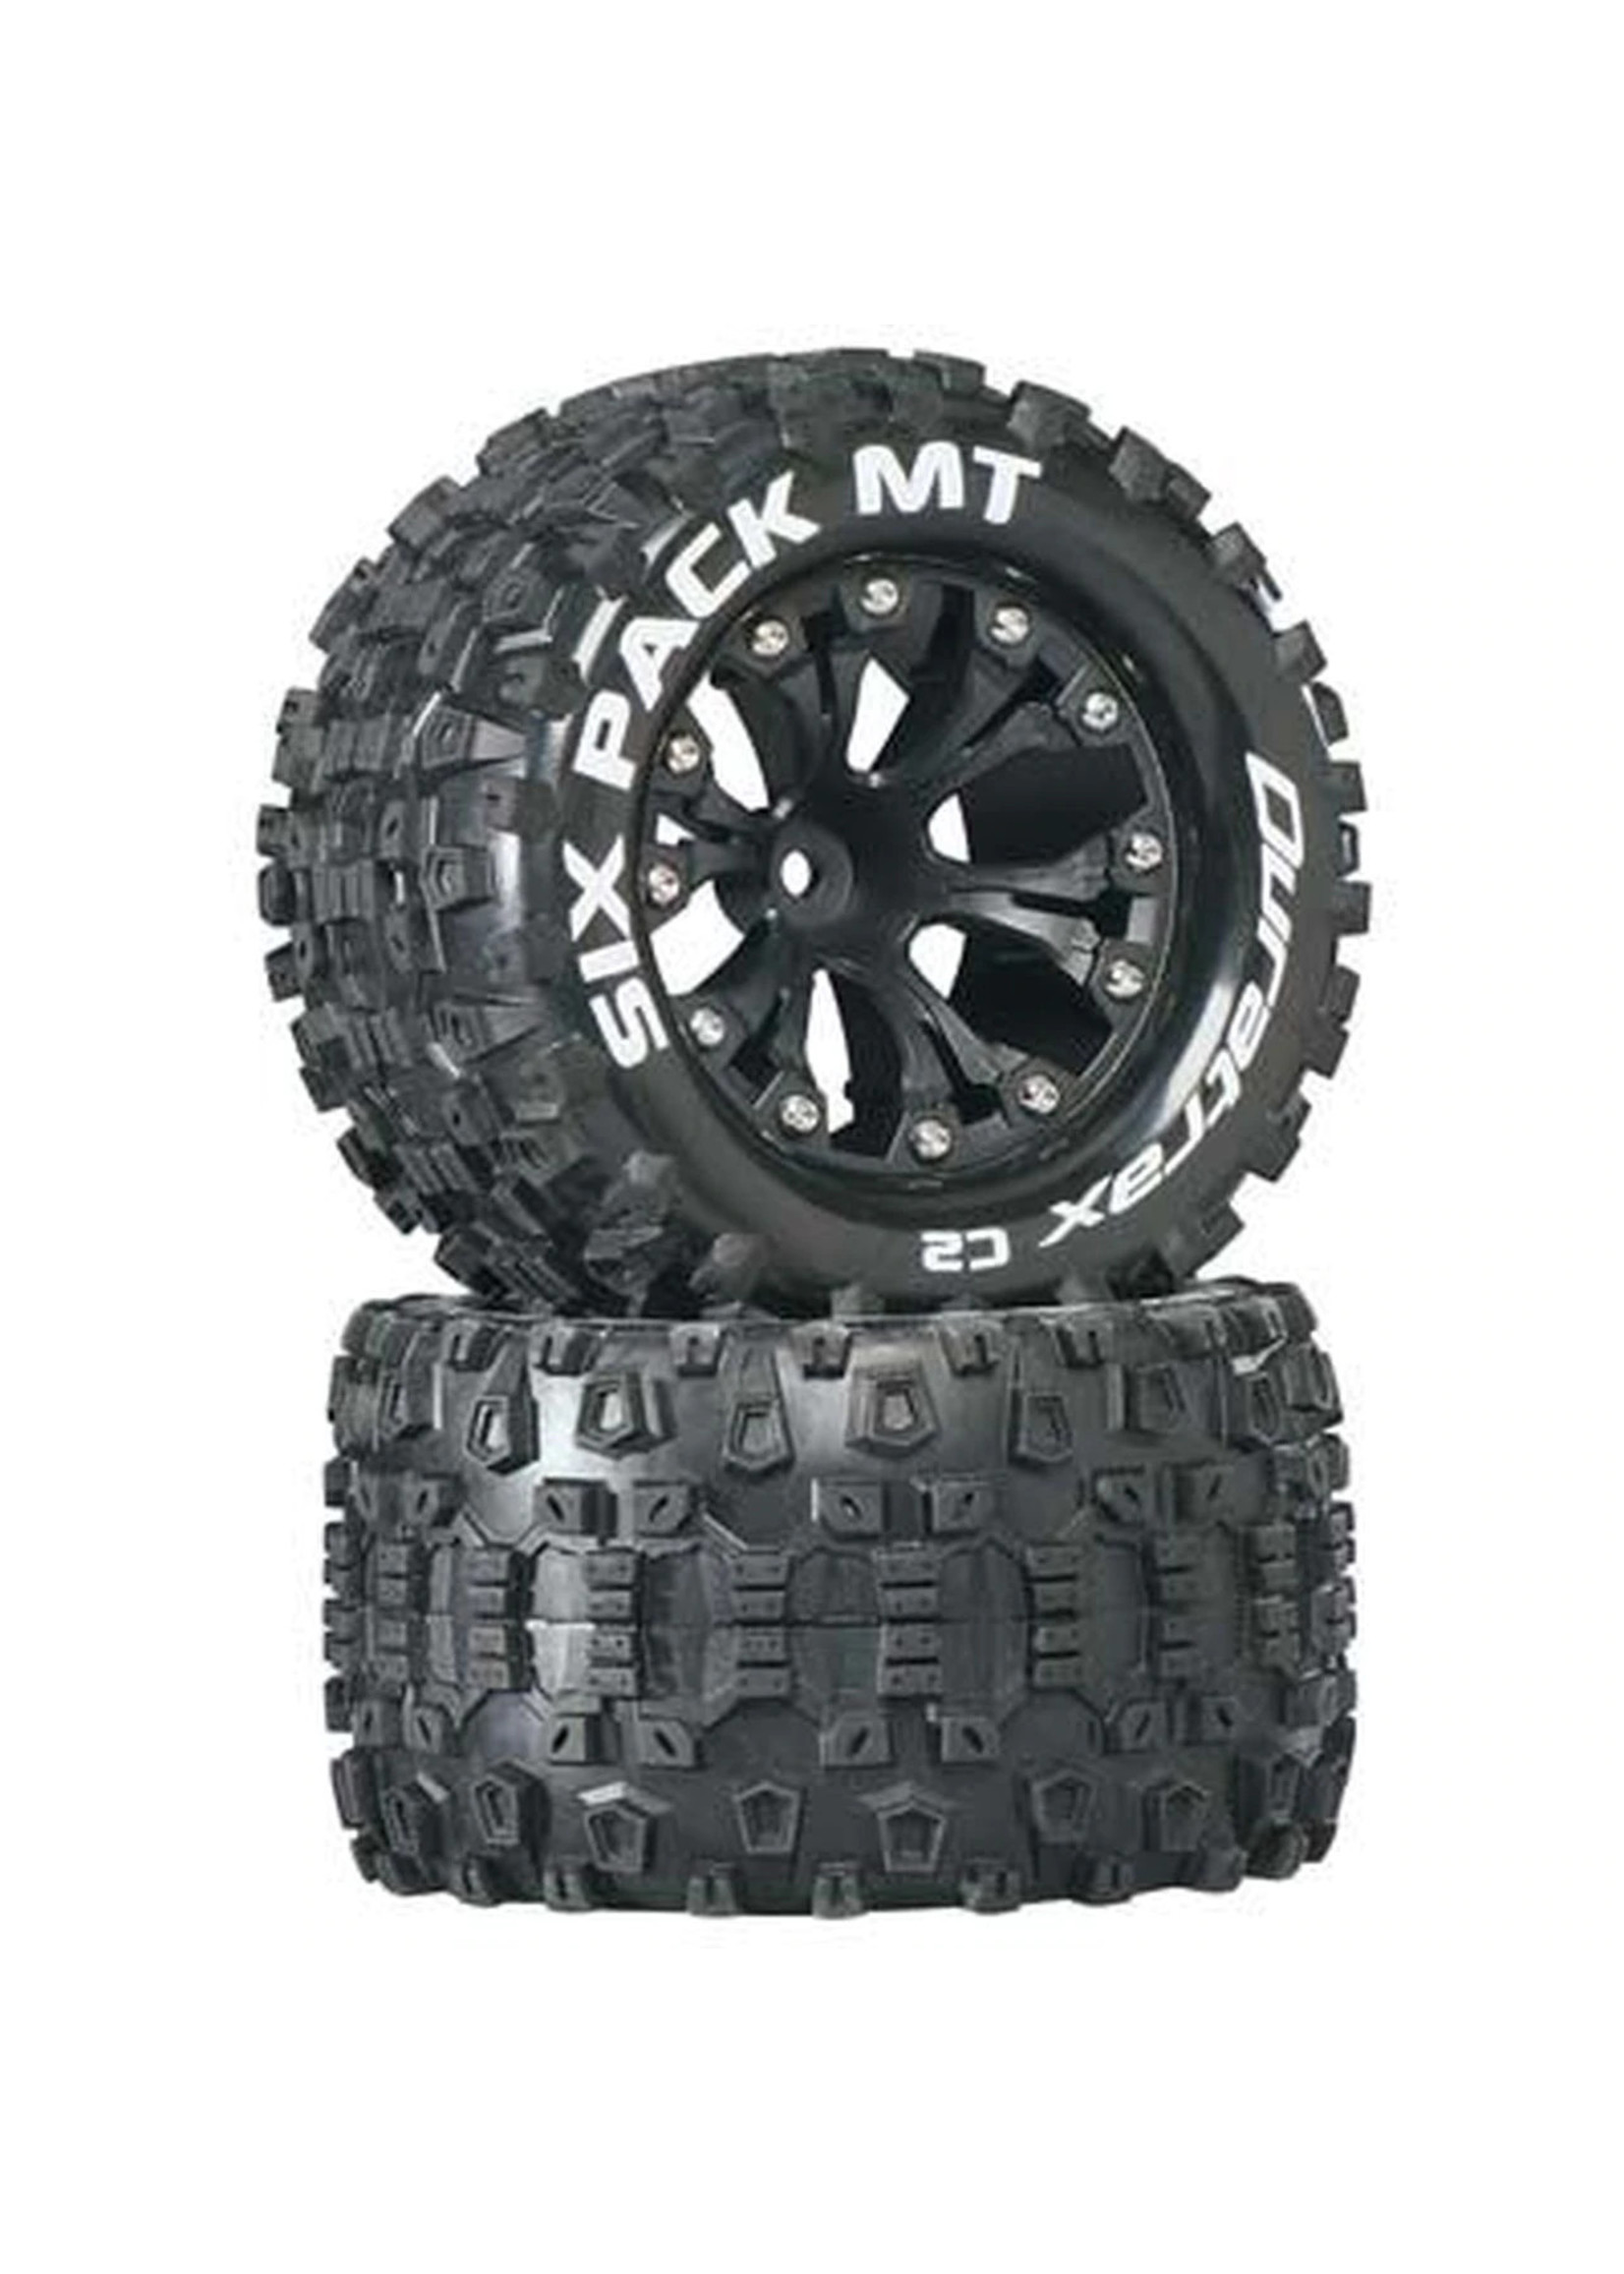 Duratrax DTXC3522 - SpeedTreads Sixpack MT 2.8 Tires Mounted (2)